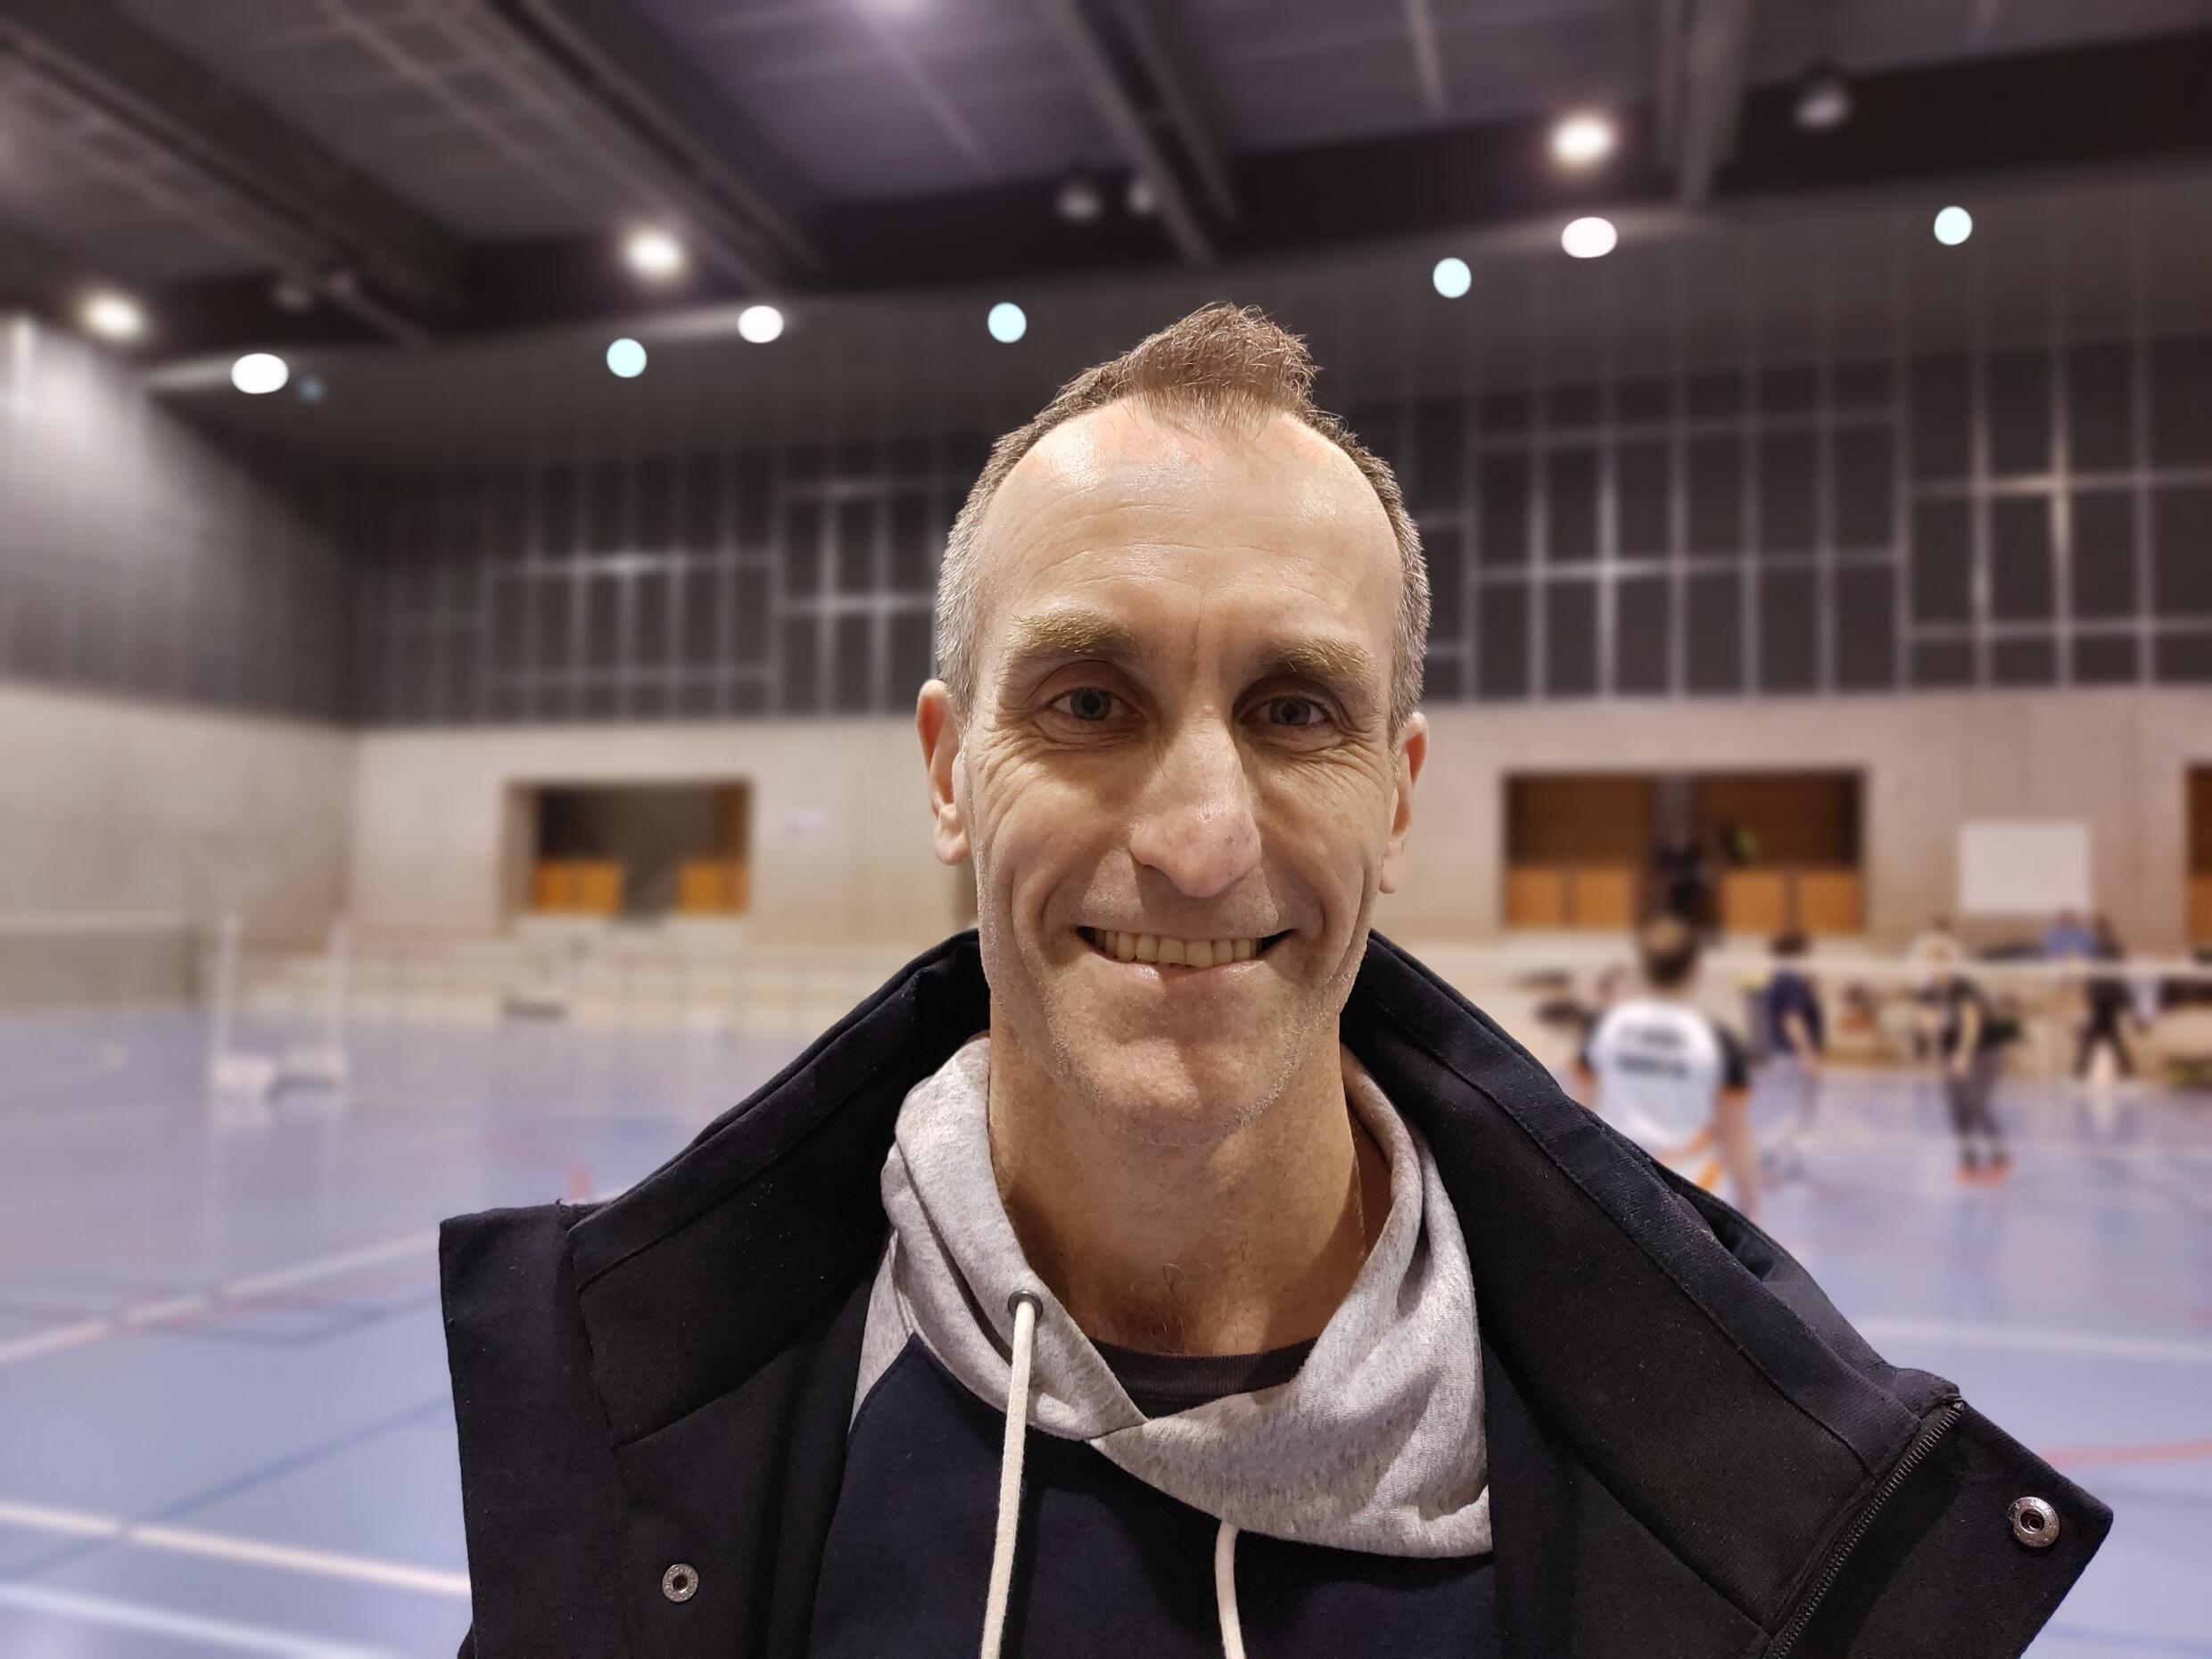 Frédéric Deléon, president of the amateur Badminton club of Saint-Jacques de la Lande in Brittany, has been selected as a referee for the Badminton events at the Olympic Games